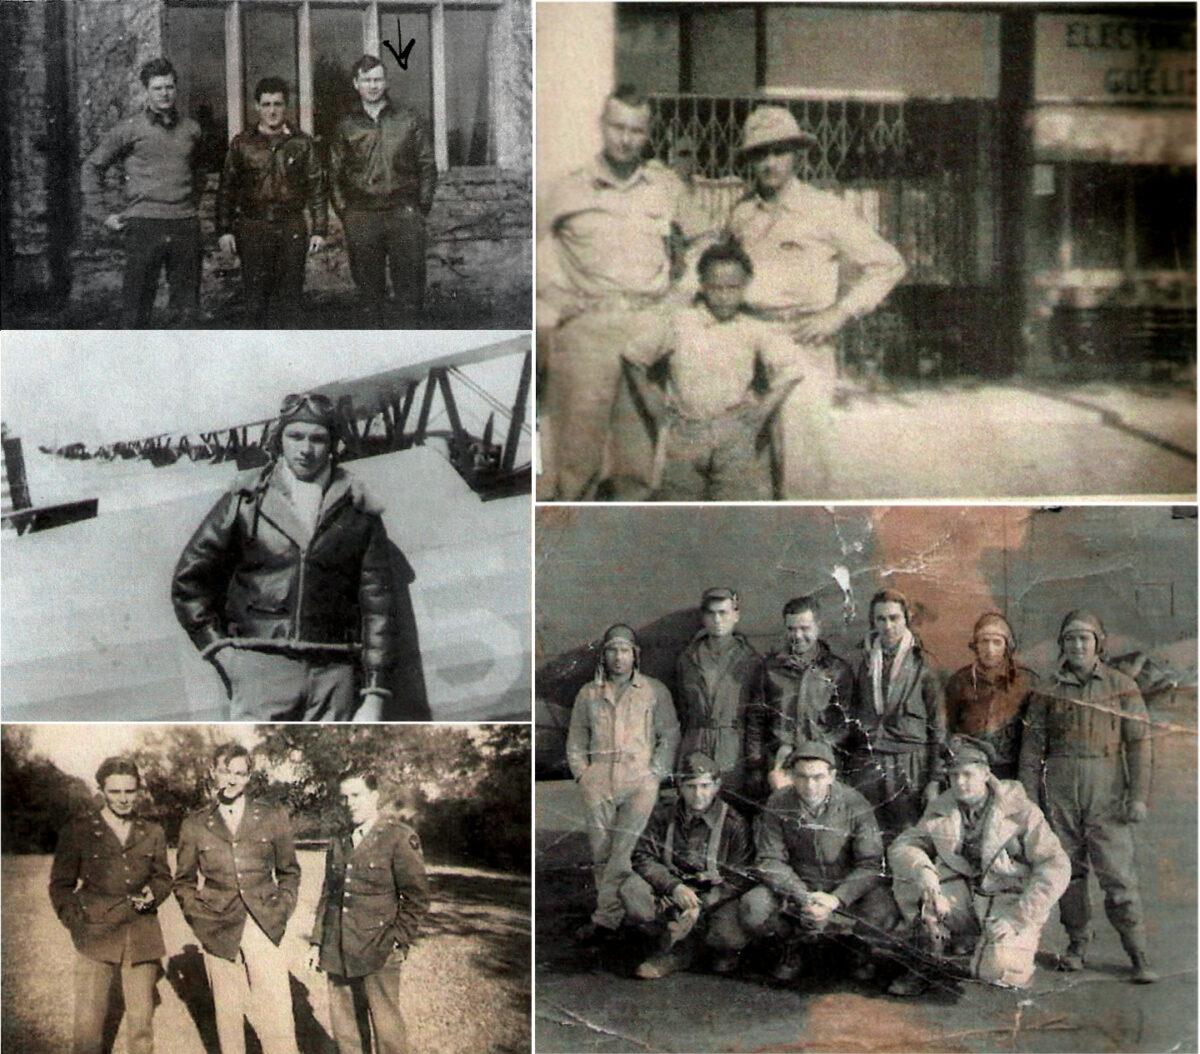 Top-Left: Lt. Harold Johnson stands with Air Corps friends. Center-Left: Lt. Johnson during World War II. Bottom-Left: Lt. Johnson (C) stands with friends in November 1942. Top-Right: Lt. Johnson (L) in North Africa in 1943. Bottom-Right: Lt. Johnson (Front-Center) is seen in Norwich, England, in 1944. (Courtesy of Mary Lou Ridinger)